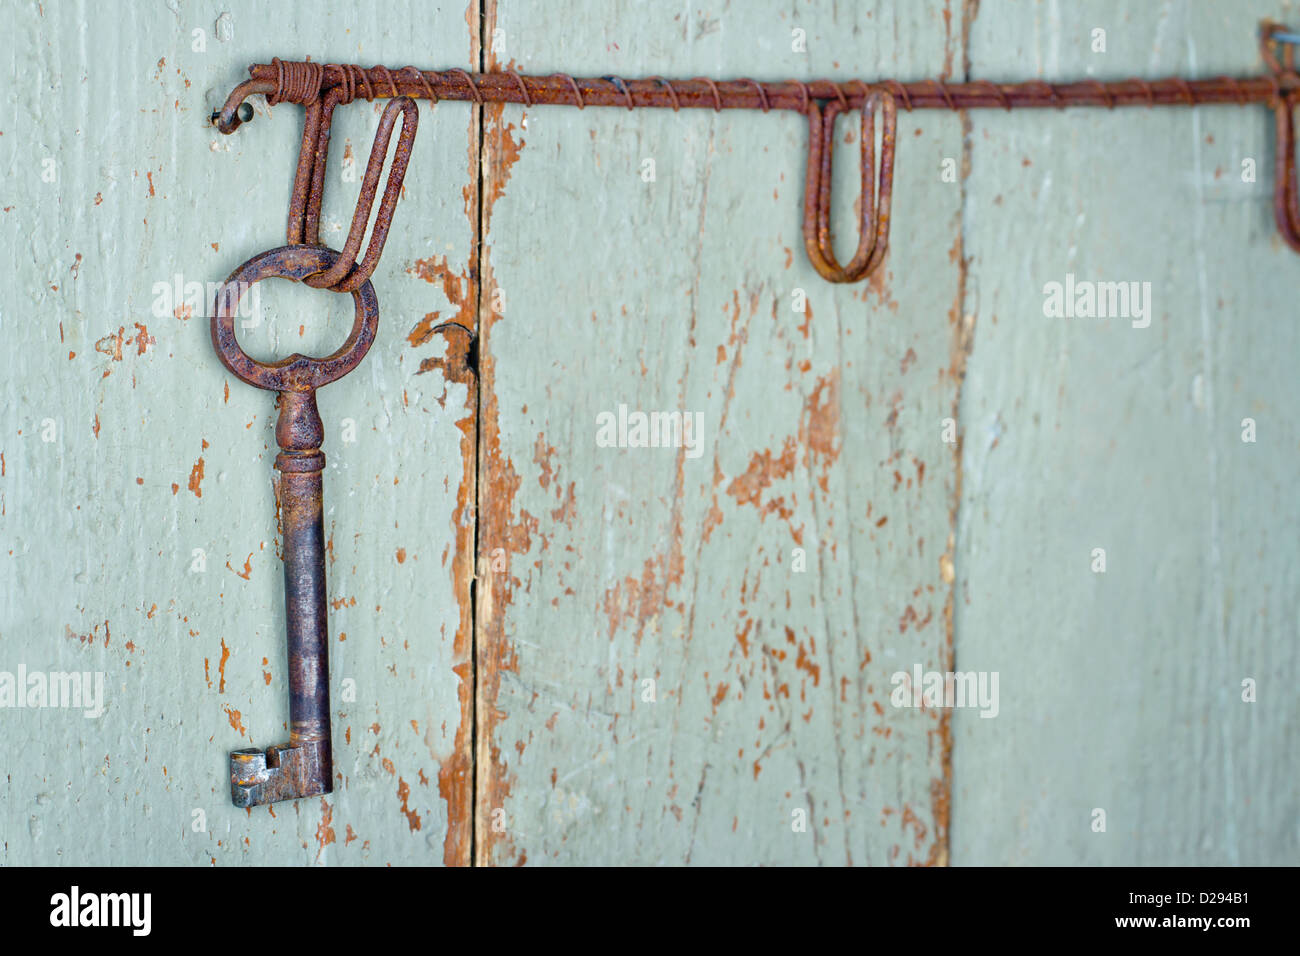 Old antique key hanging on wooden rustic green background Stock Photo